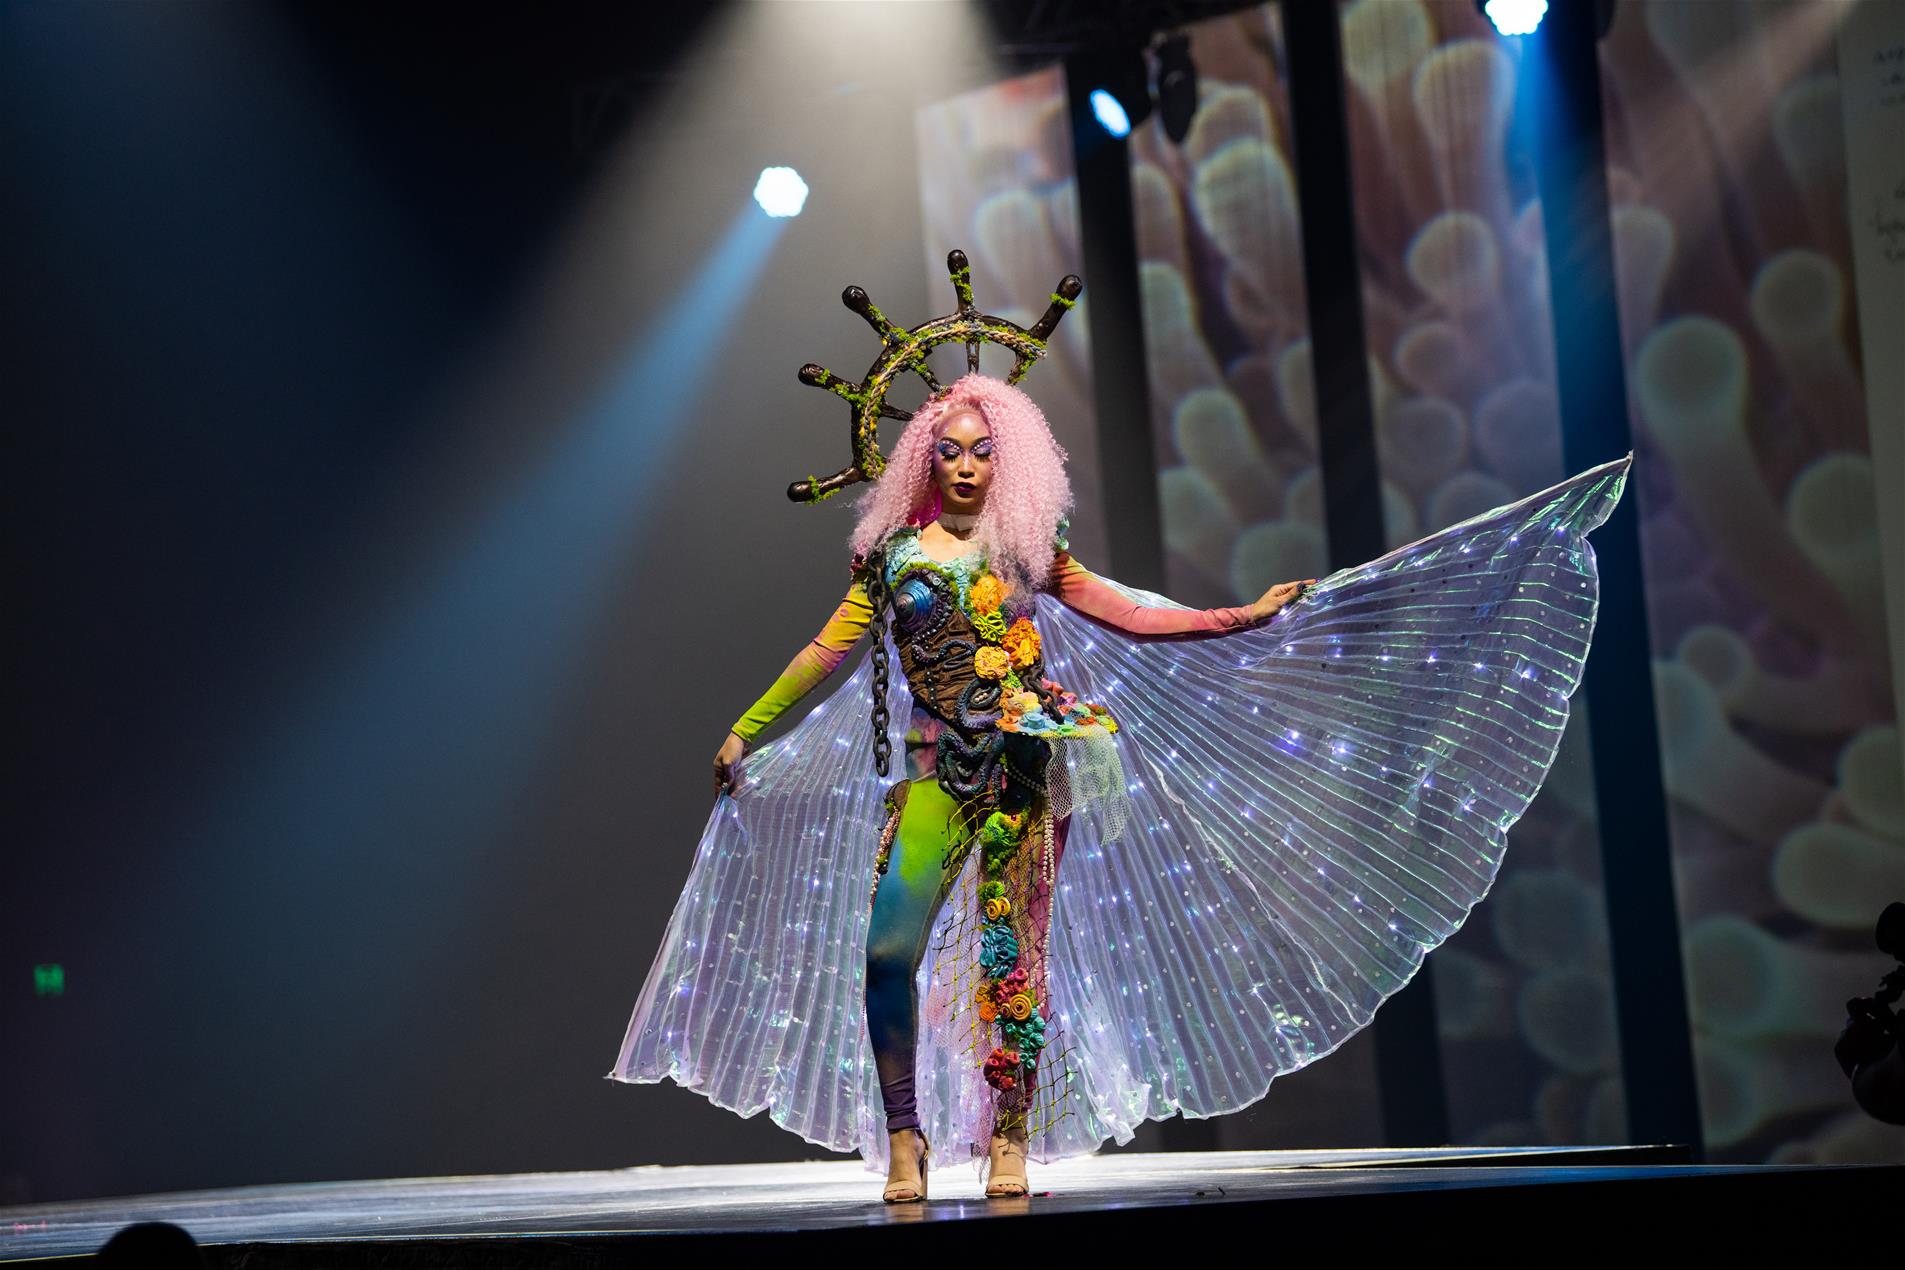 A female model in a colourful costume performing on stage.